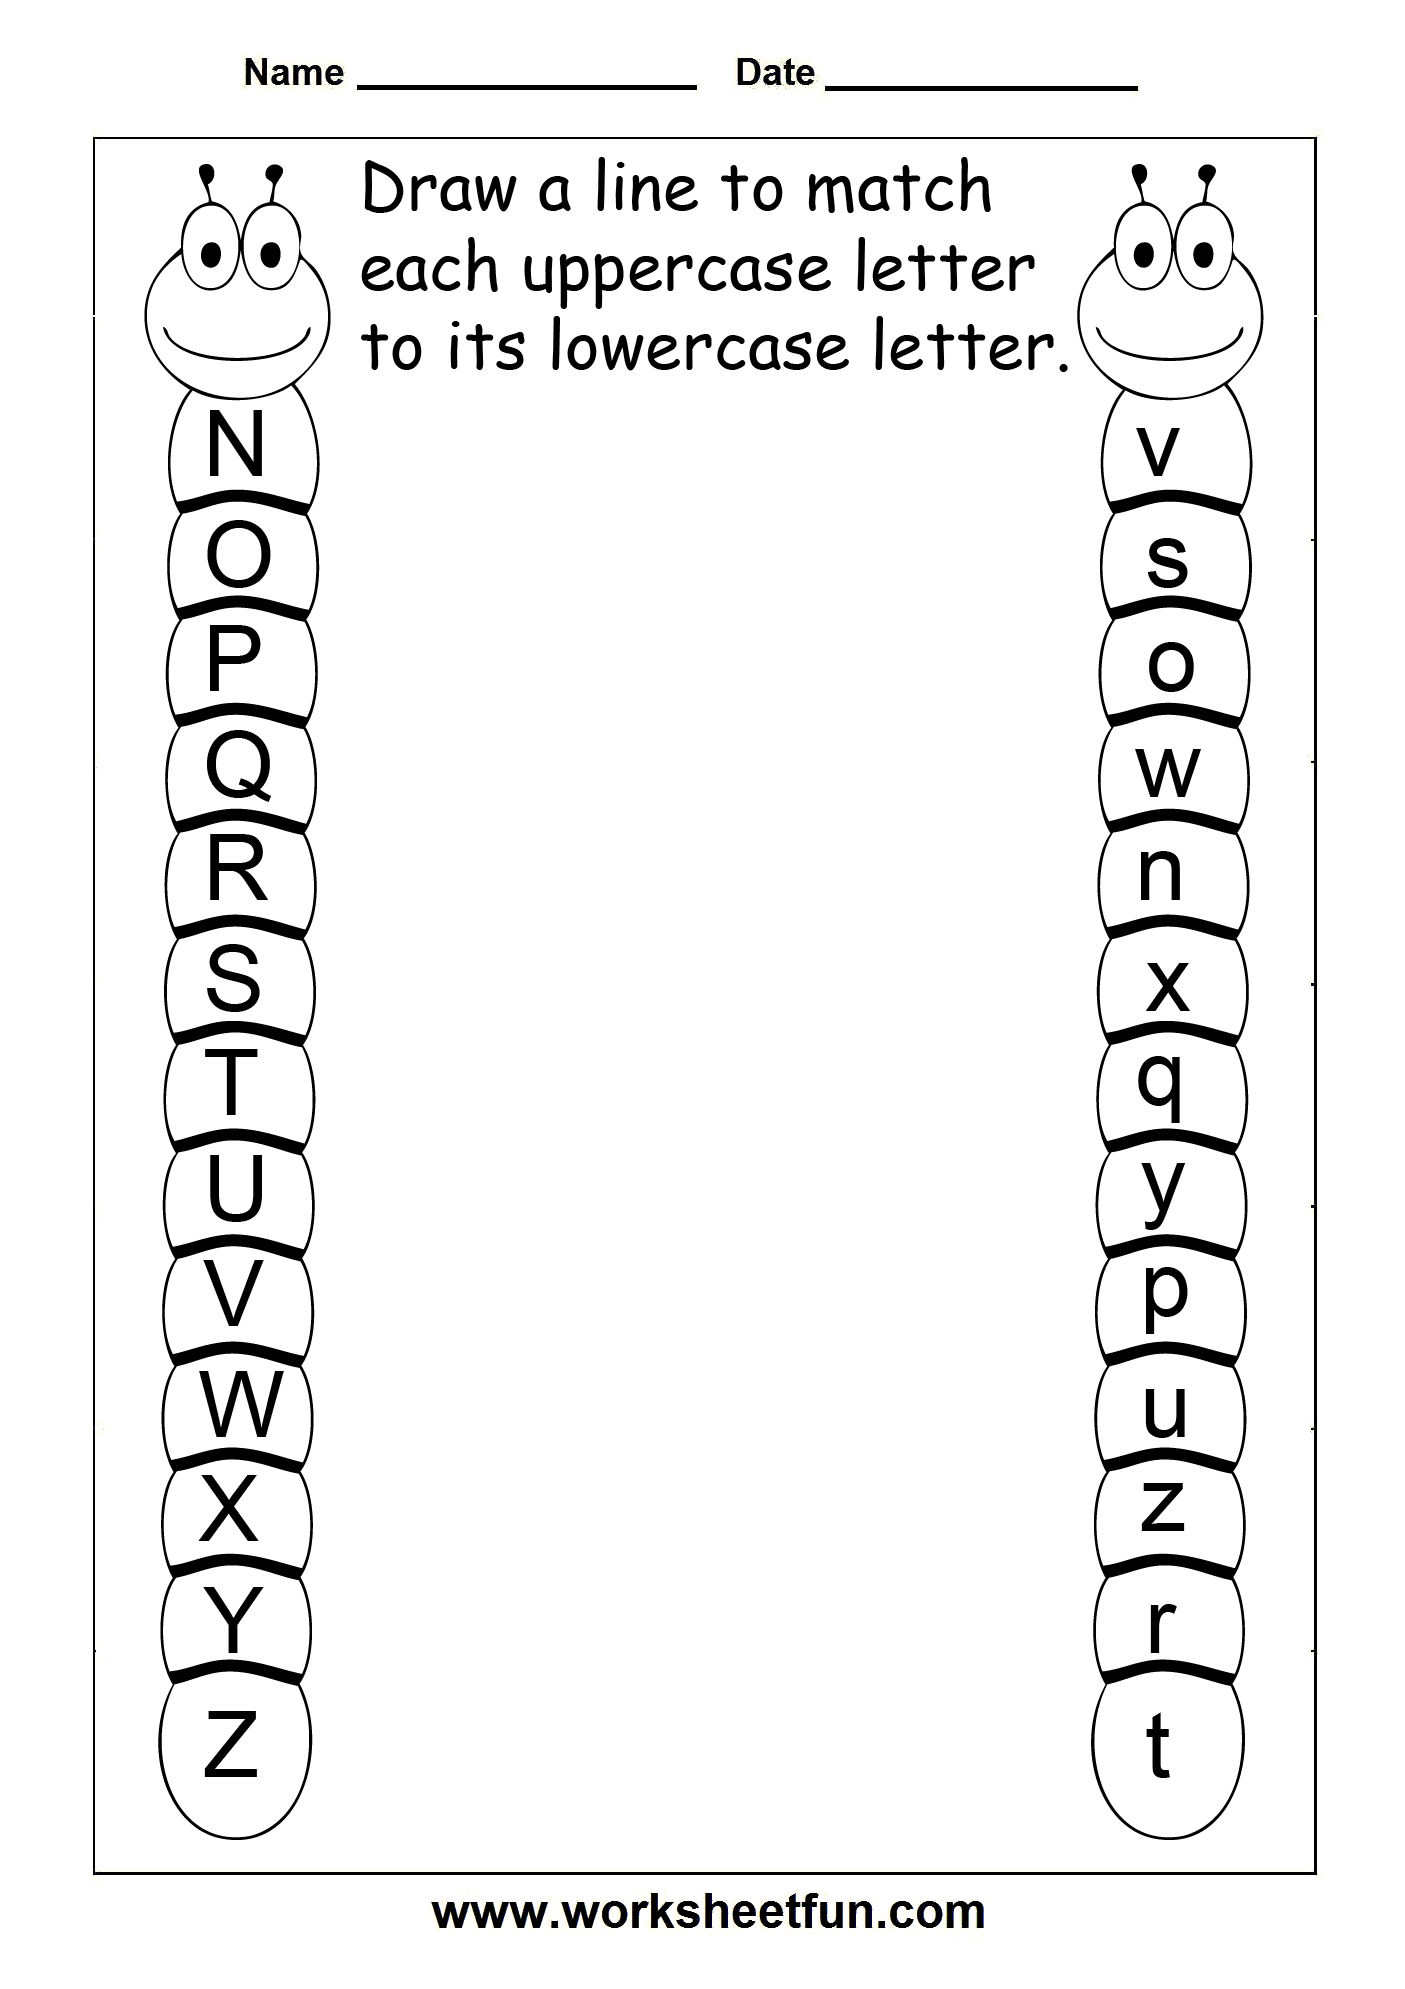 Matching Lowercase And Uppercase Letters Worksheet